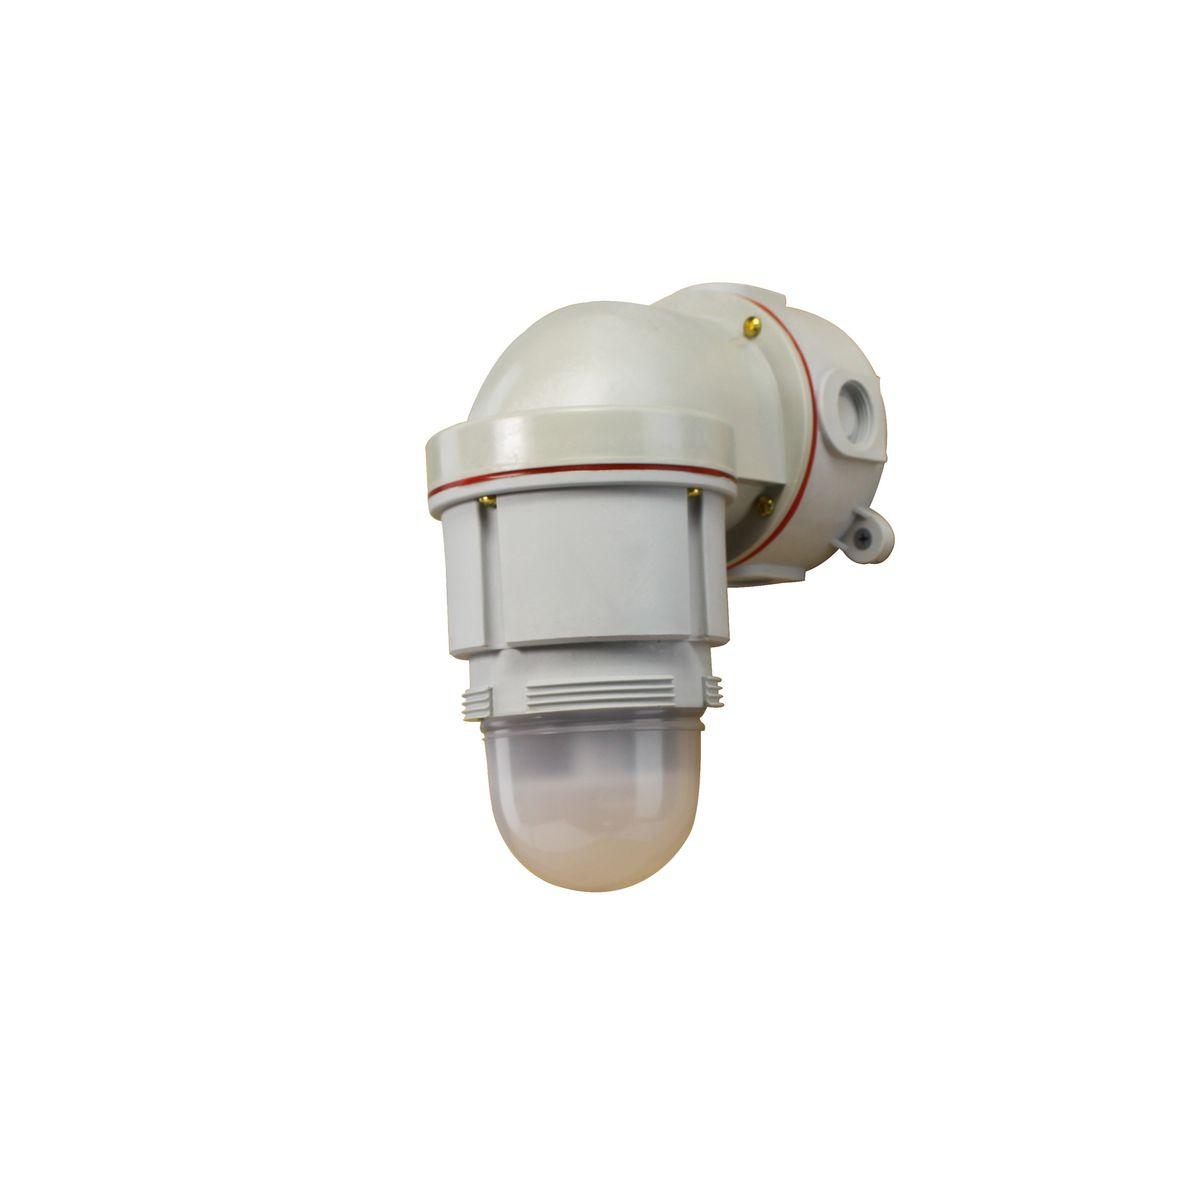 Hubbell NVL230B8N NVL Series Non-Metallic Corrosion Resistant Hazardous Location LED Fixture, M20 Wall Bracket  ; Energy and labor-saving LED ; High Efﬁcacy (lumens per watt) ; Compact Size ; Type 3, 4, & 4X Rated ; IP66 Marine Rated ; ABS Approved ; Resists corrosive effe